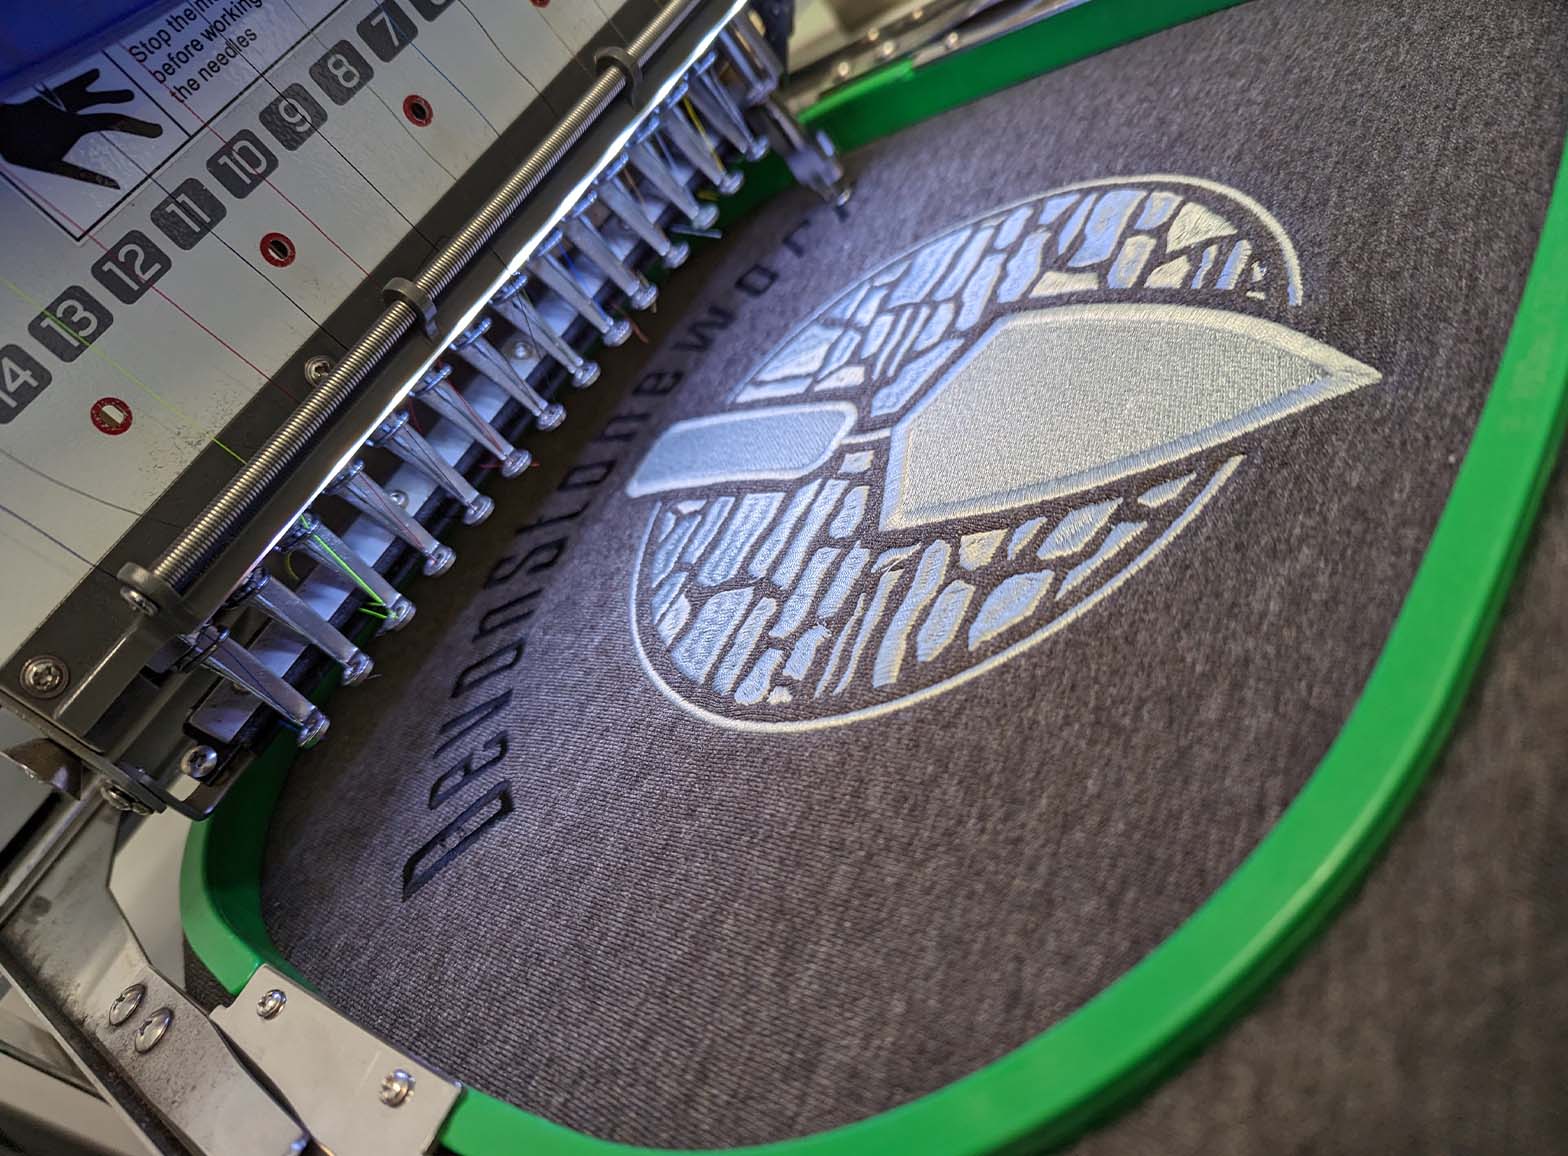 A photograph of the Fine Stitch Embroidery machines working at the Clothing Your Way production studio in Paignton, South Devon.